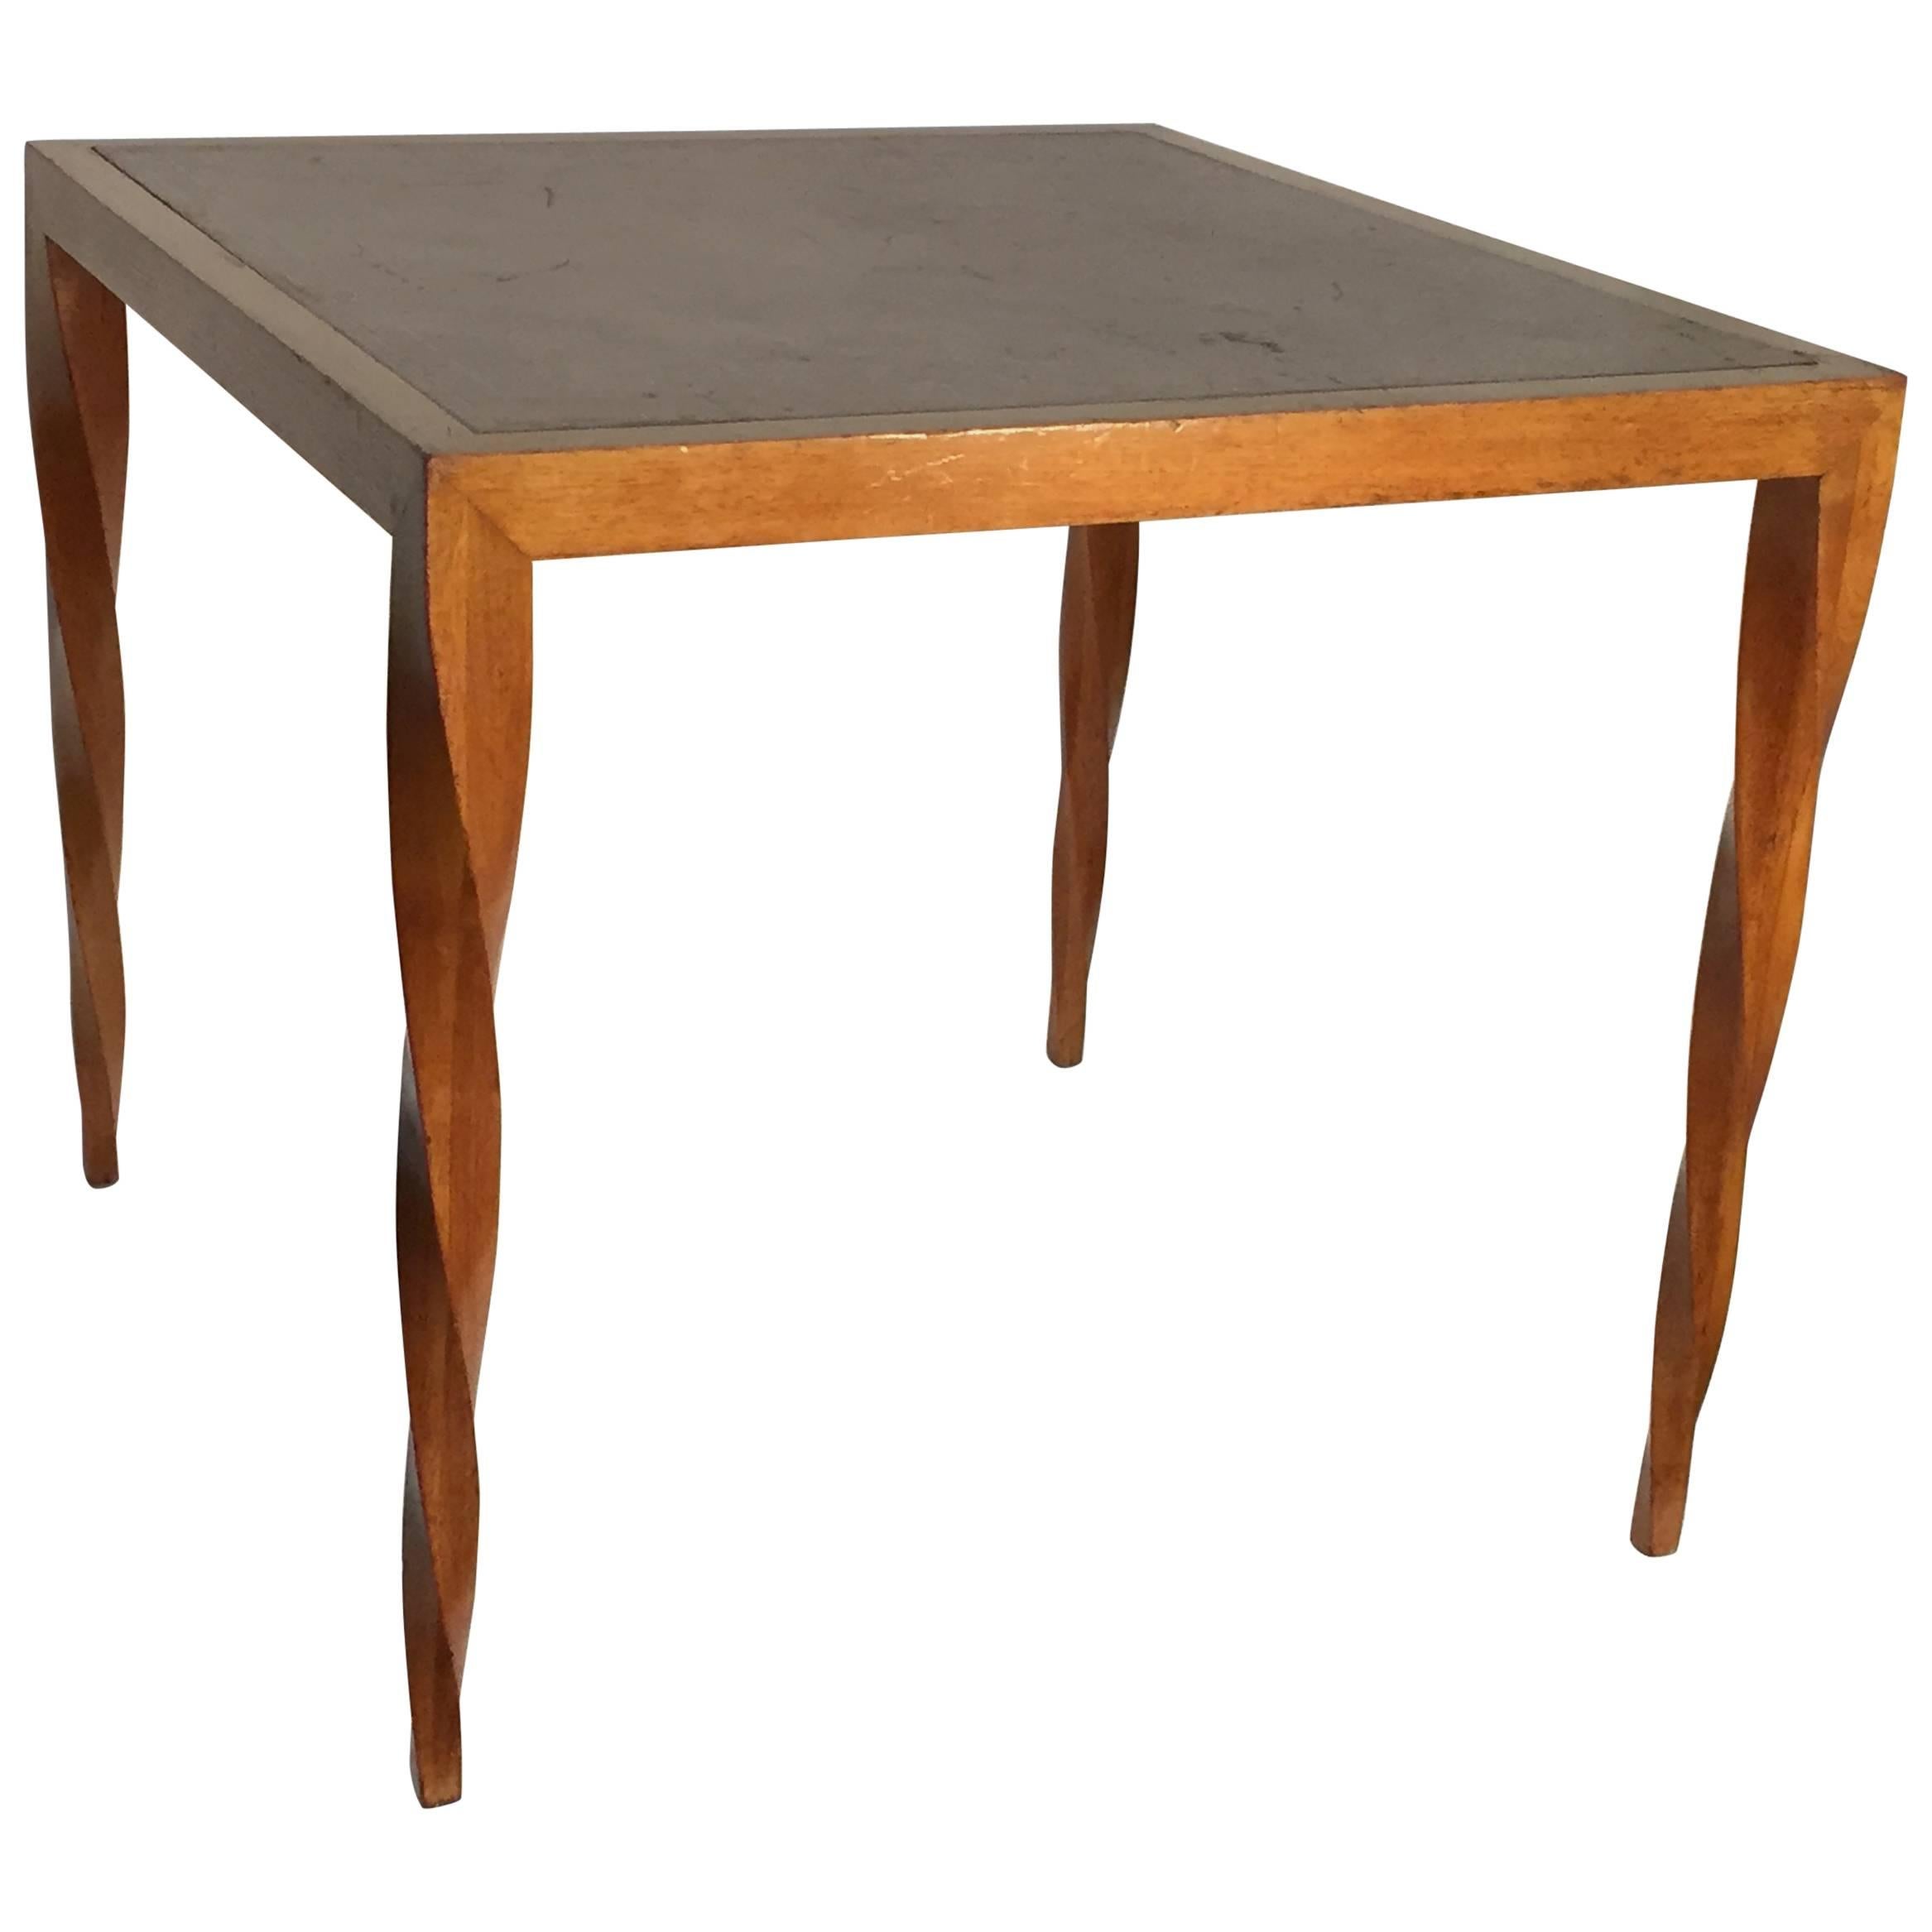 Lacewood Center Table with Leather Top by Johan Tapp